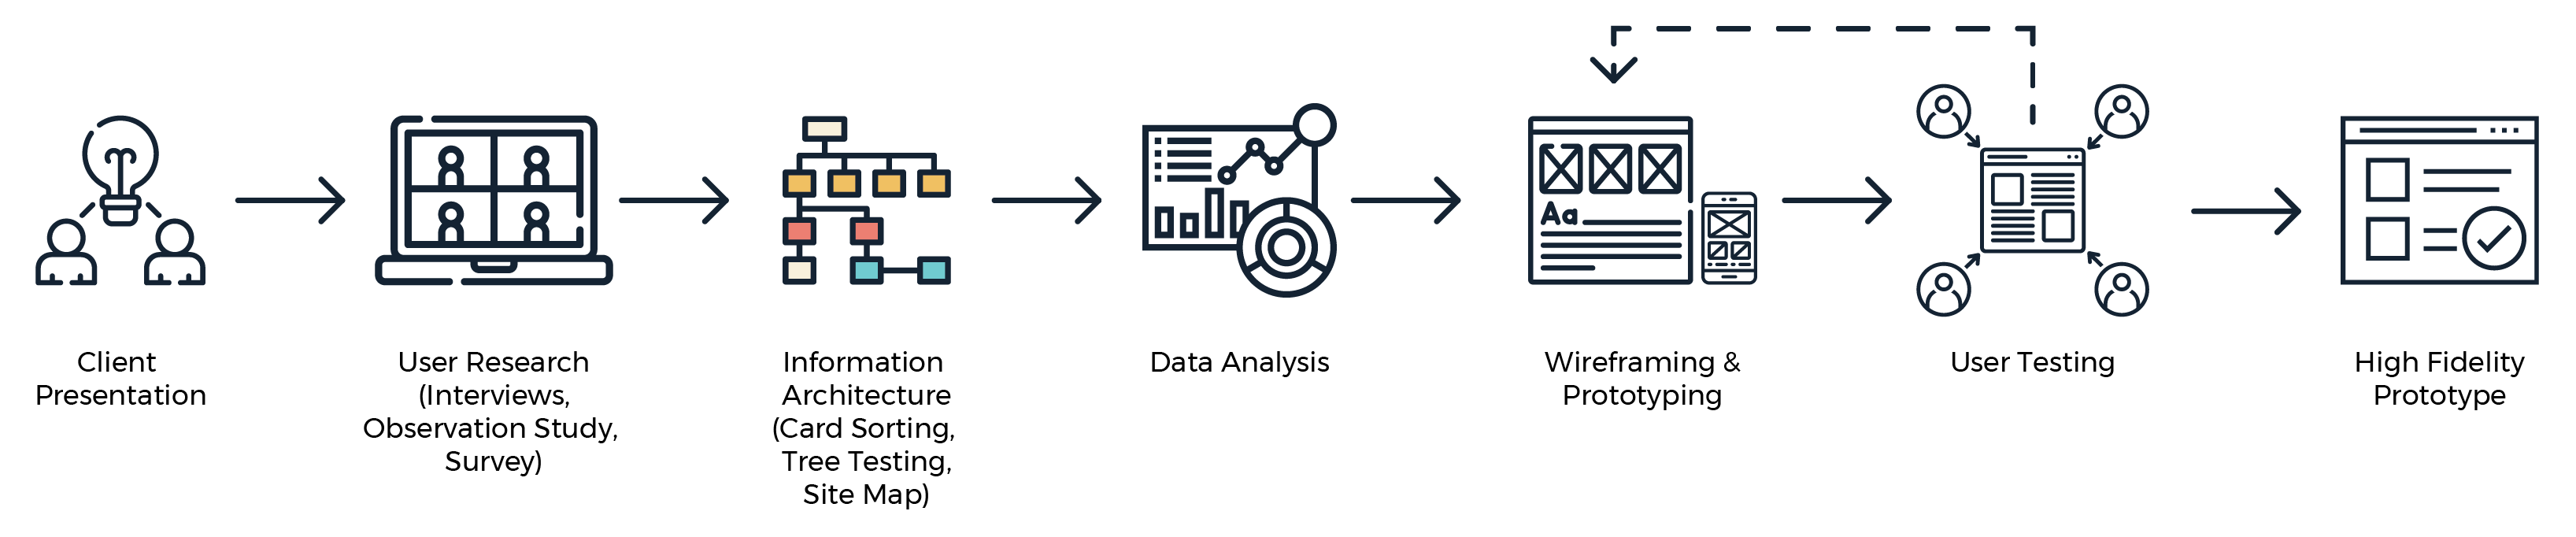 the process for research explained with icons